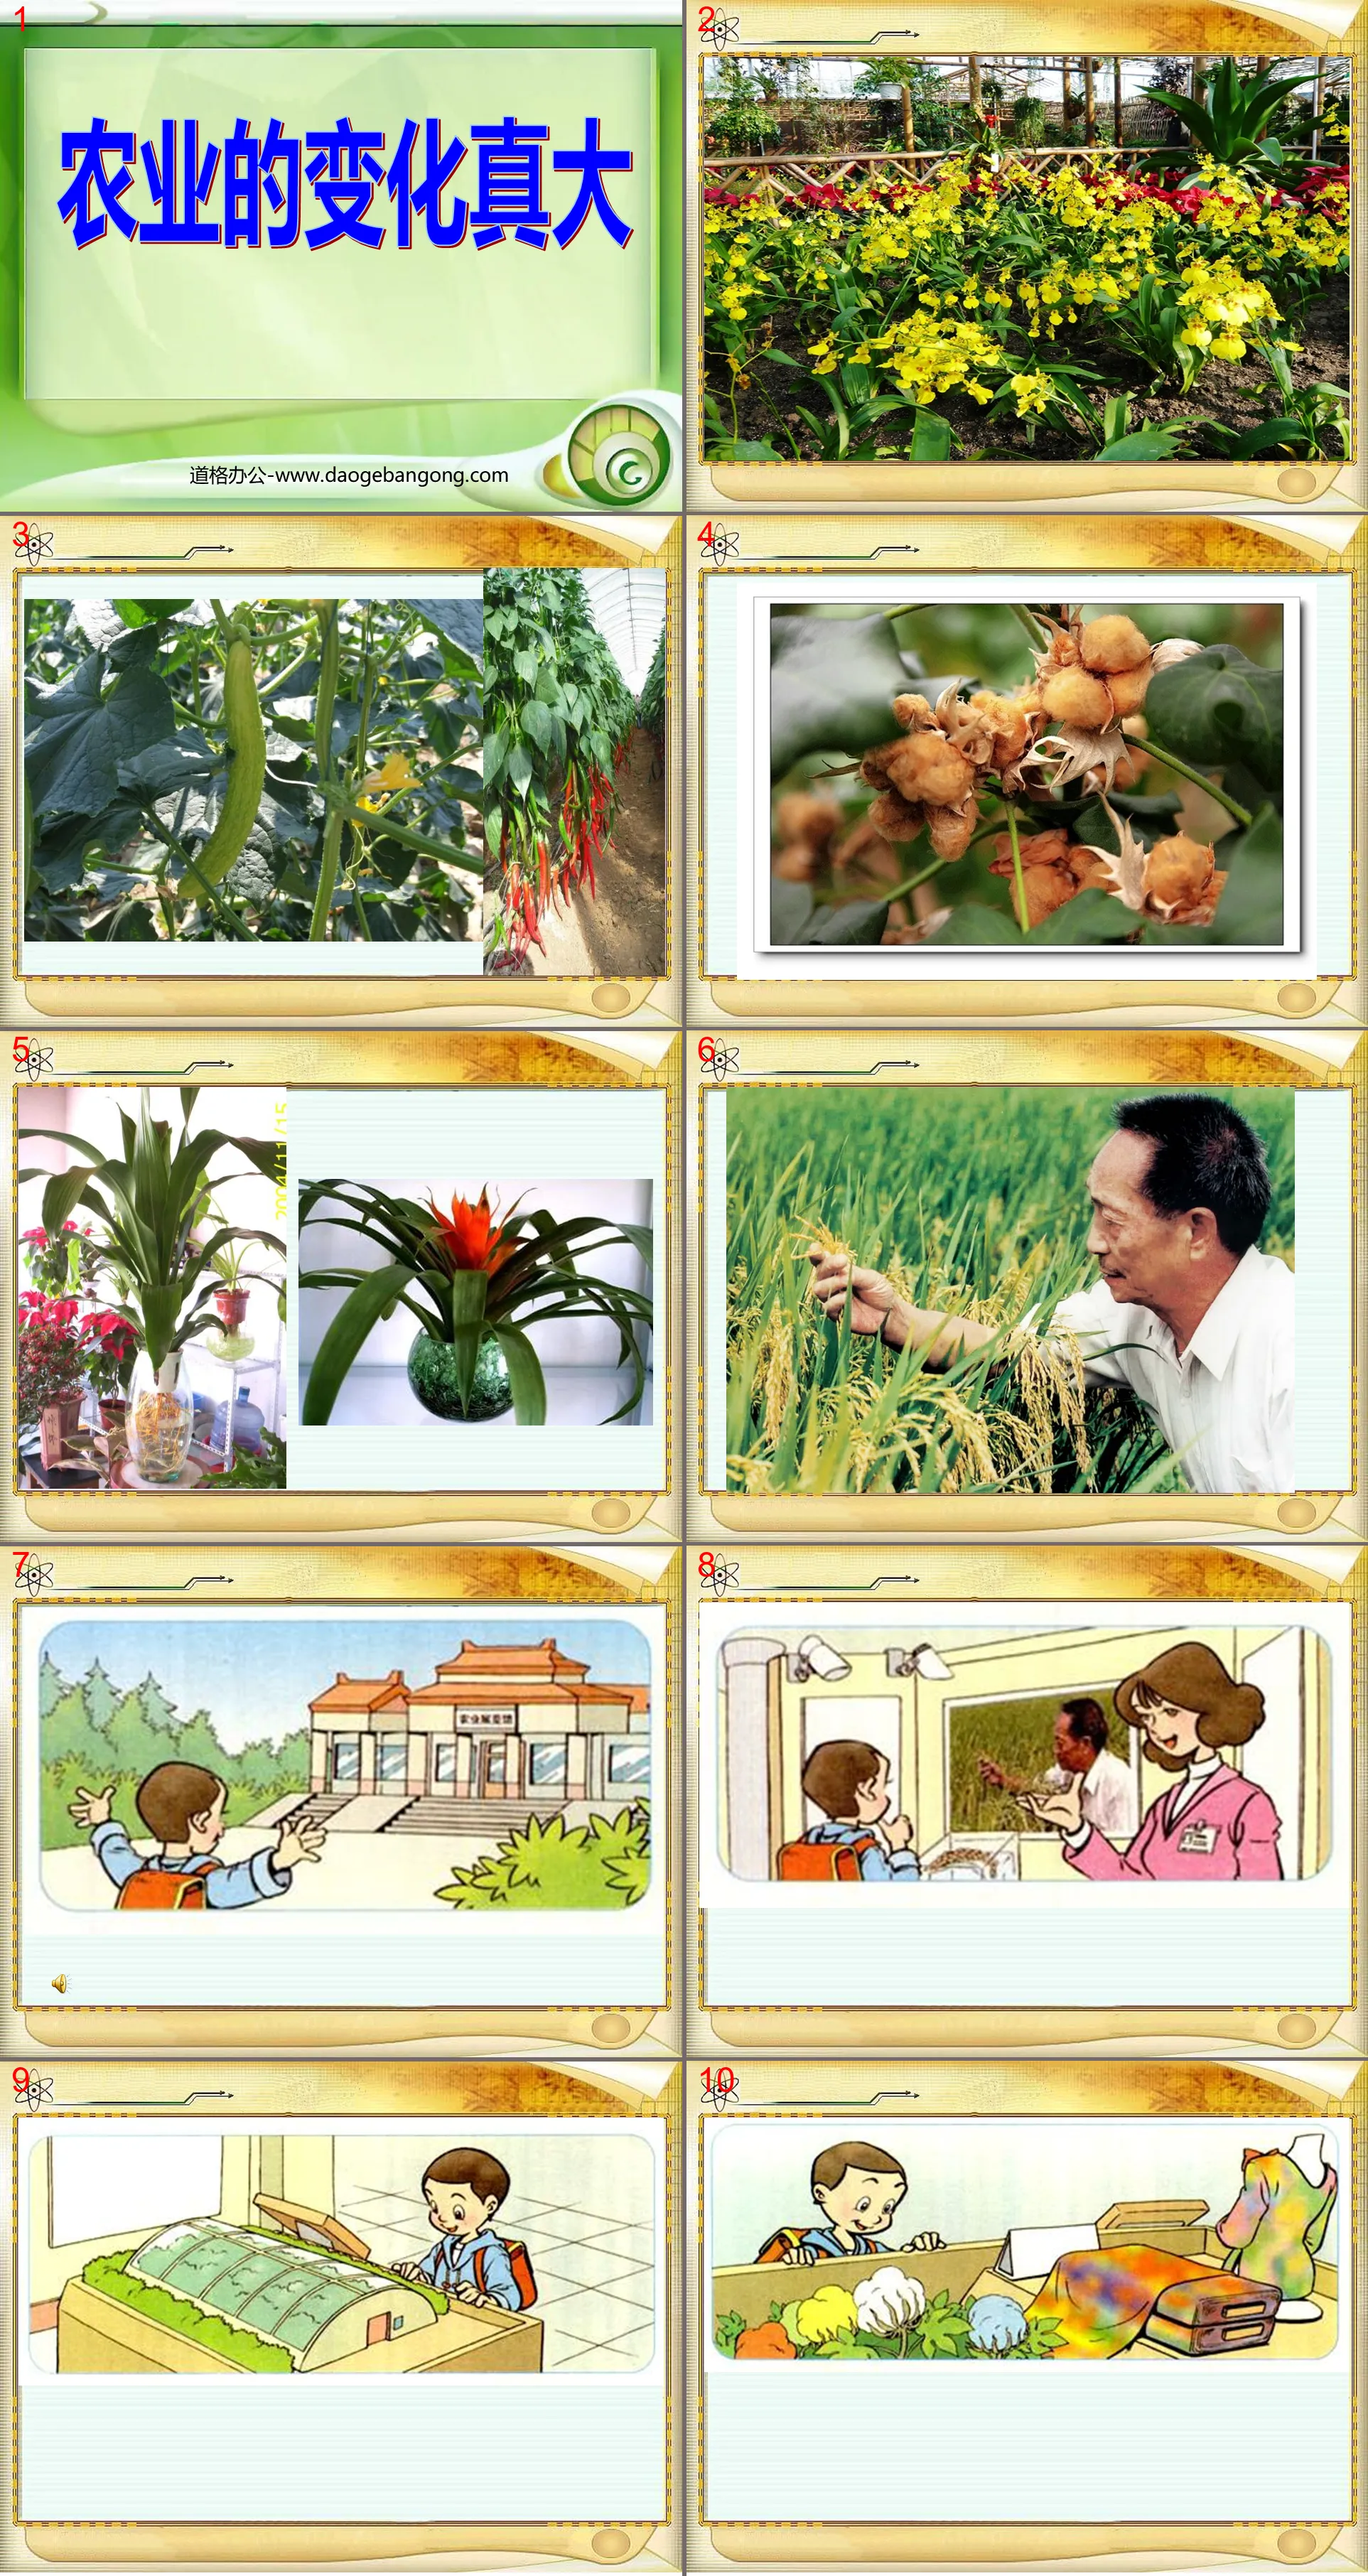 "Agriculture has changed so much" PPT courseware 4